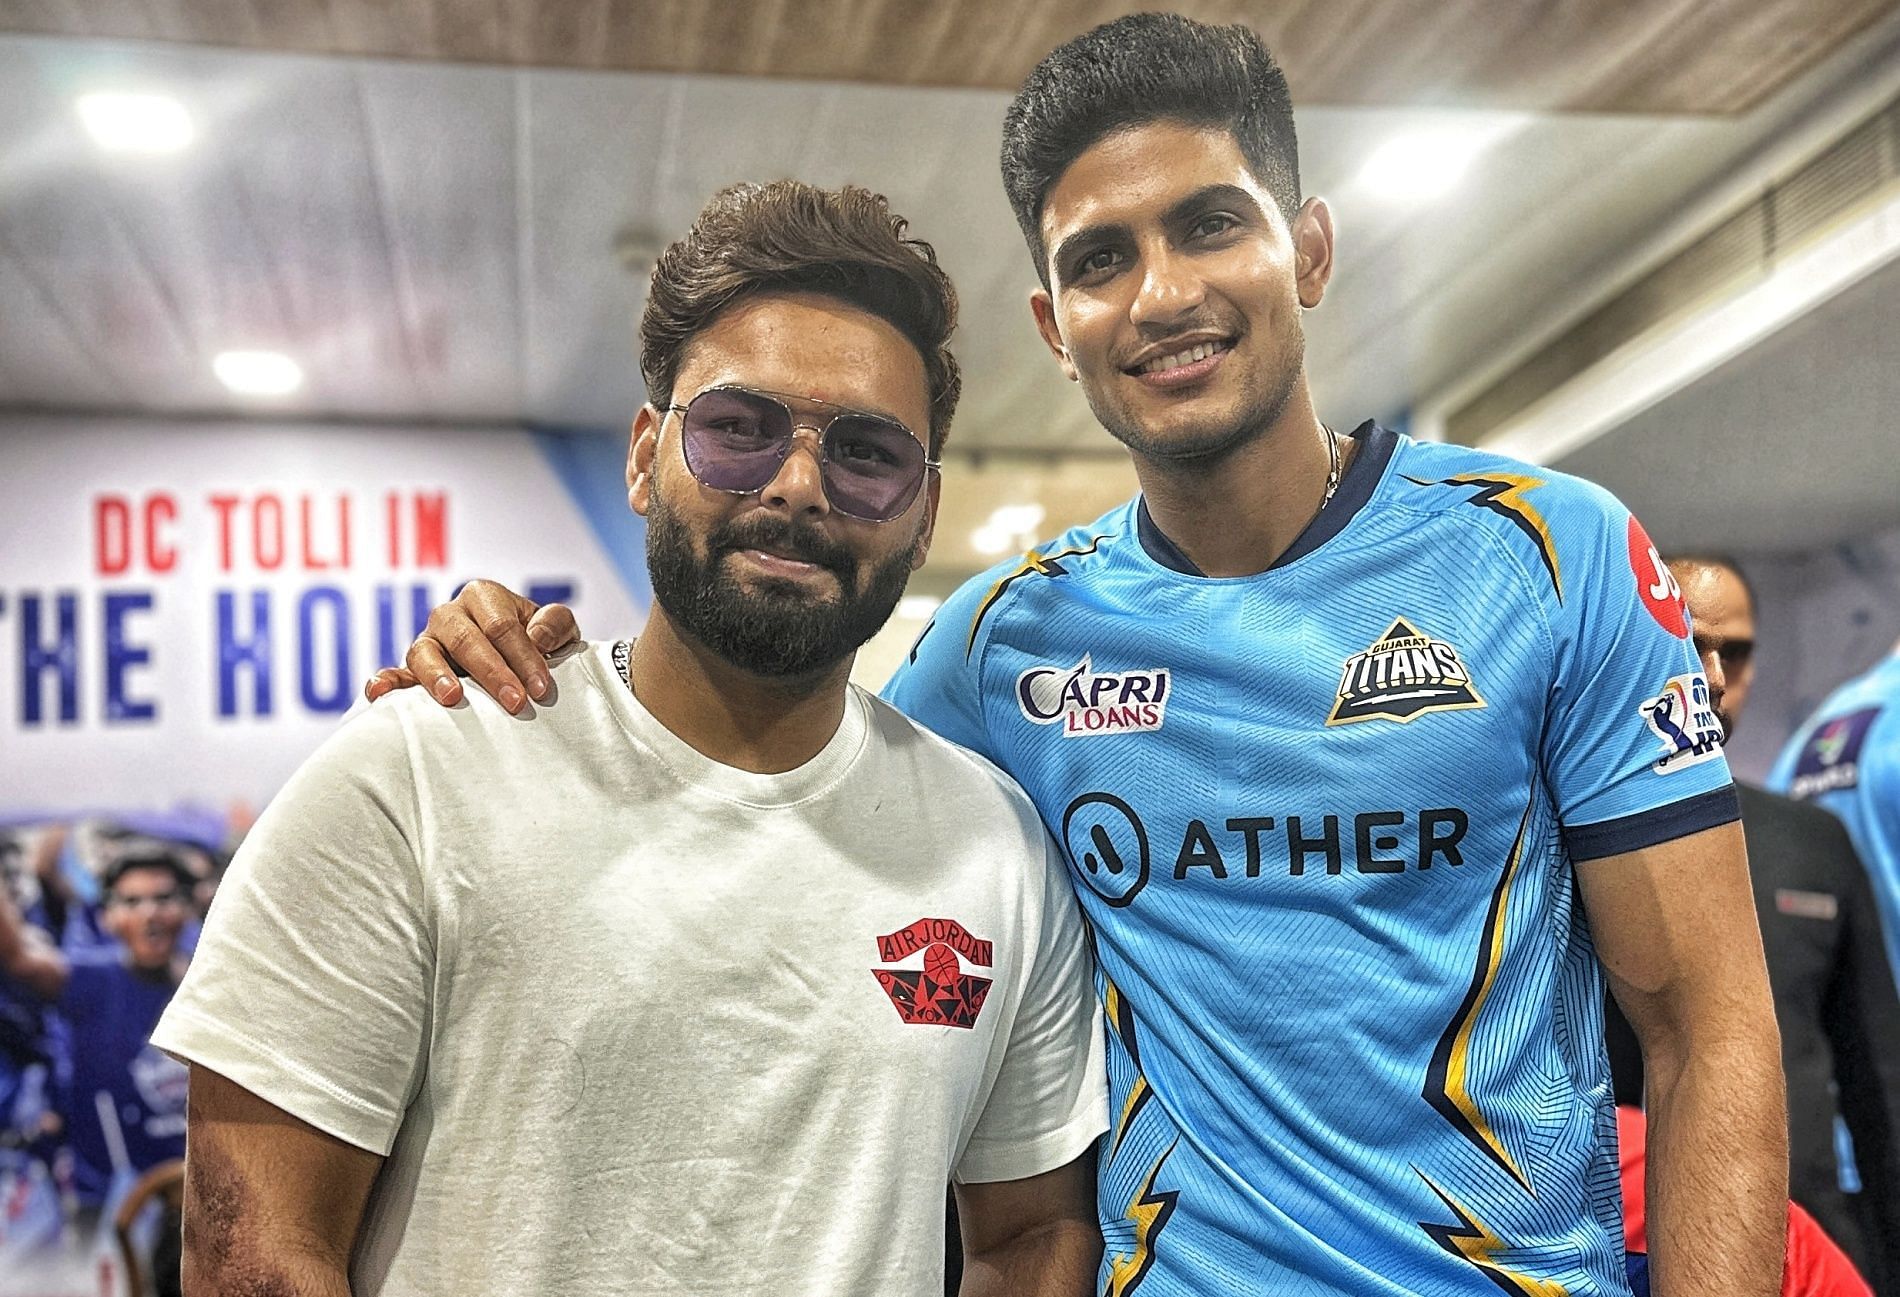 “RiShub union” Rishabh Pant catches up with Shubman Gill during DC